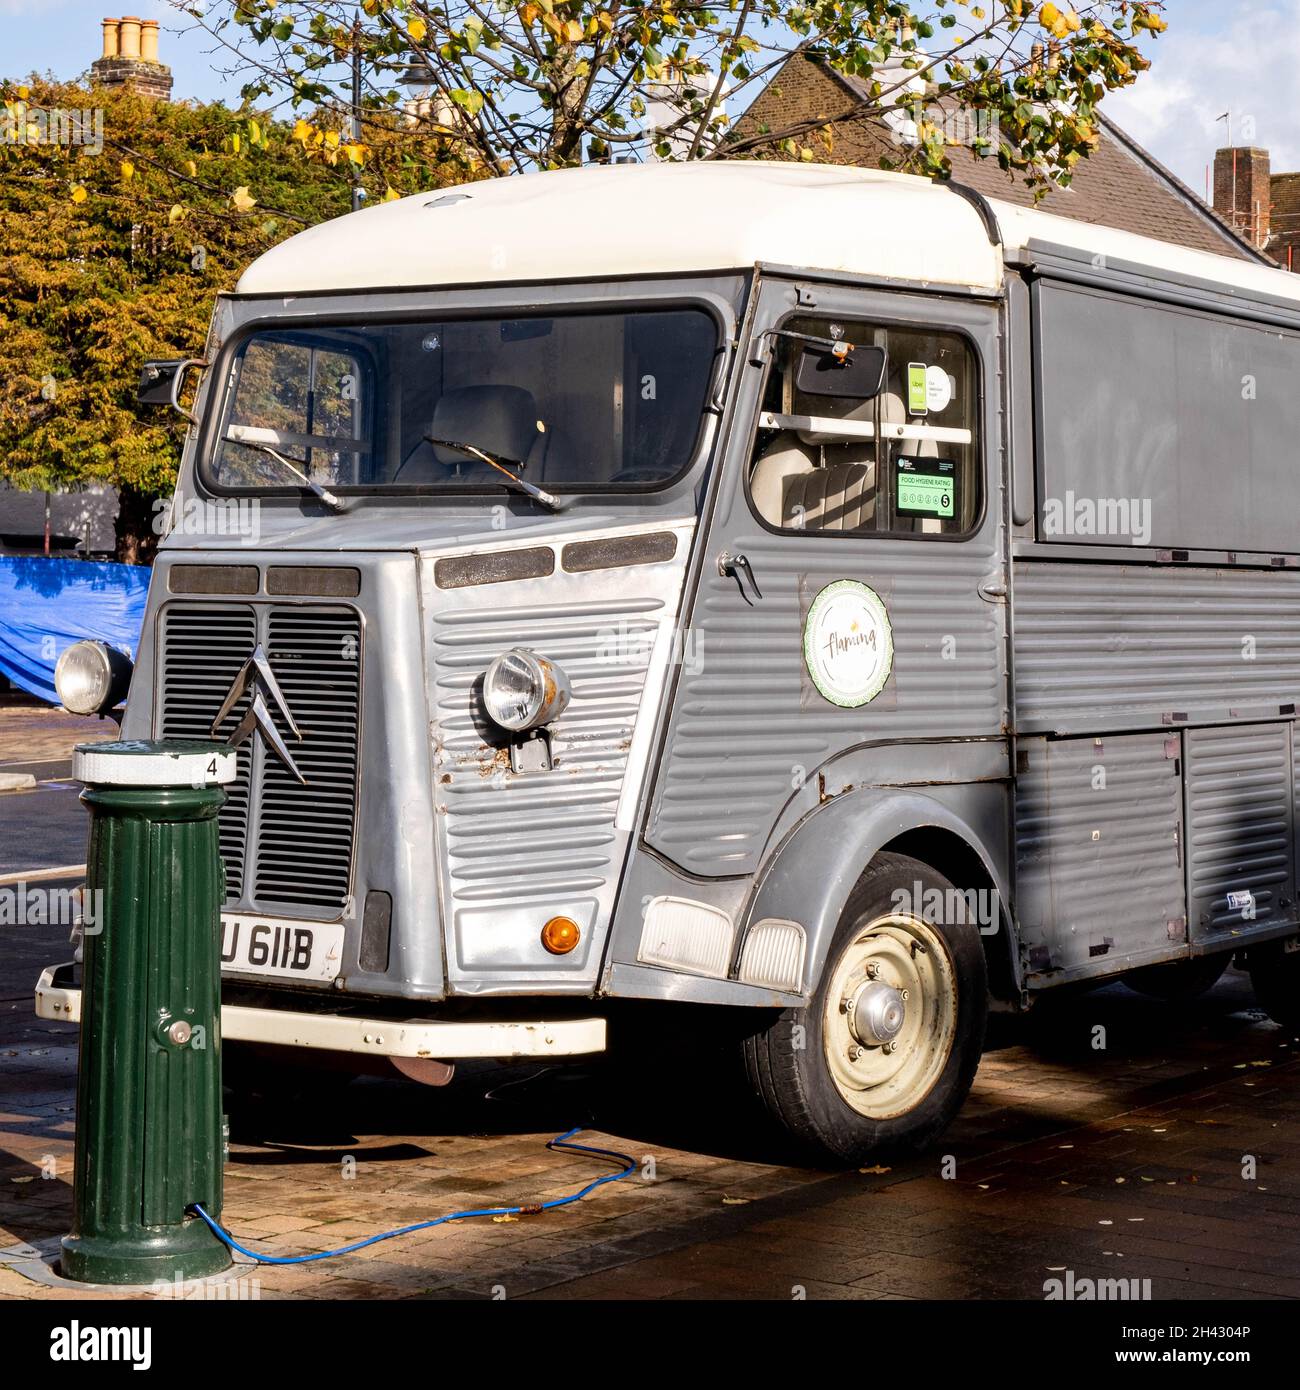 Vintage Citroen Food Truck High Resolution Stock Photography and Images -  Alamy